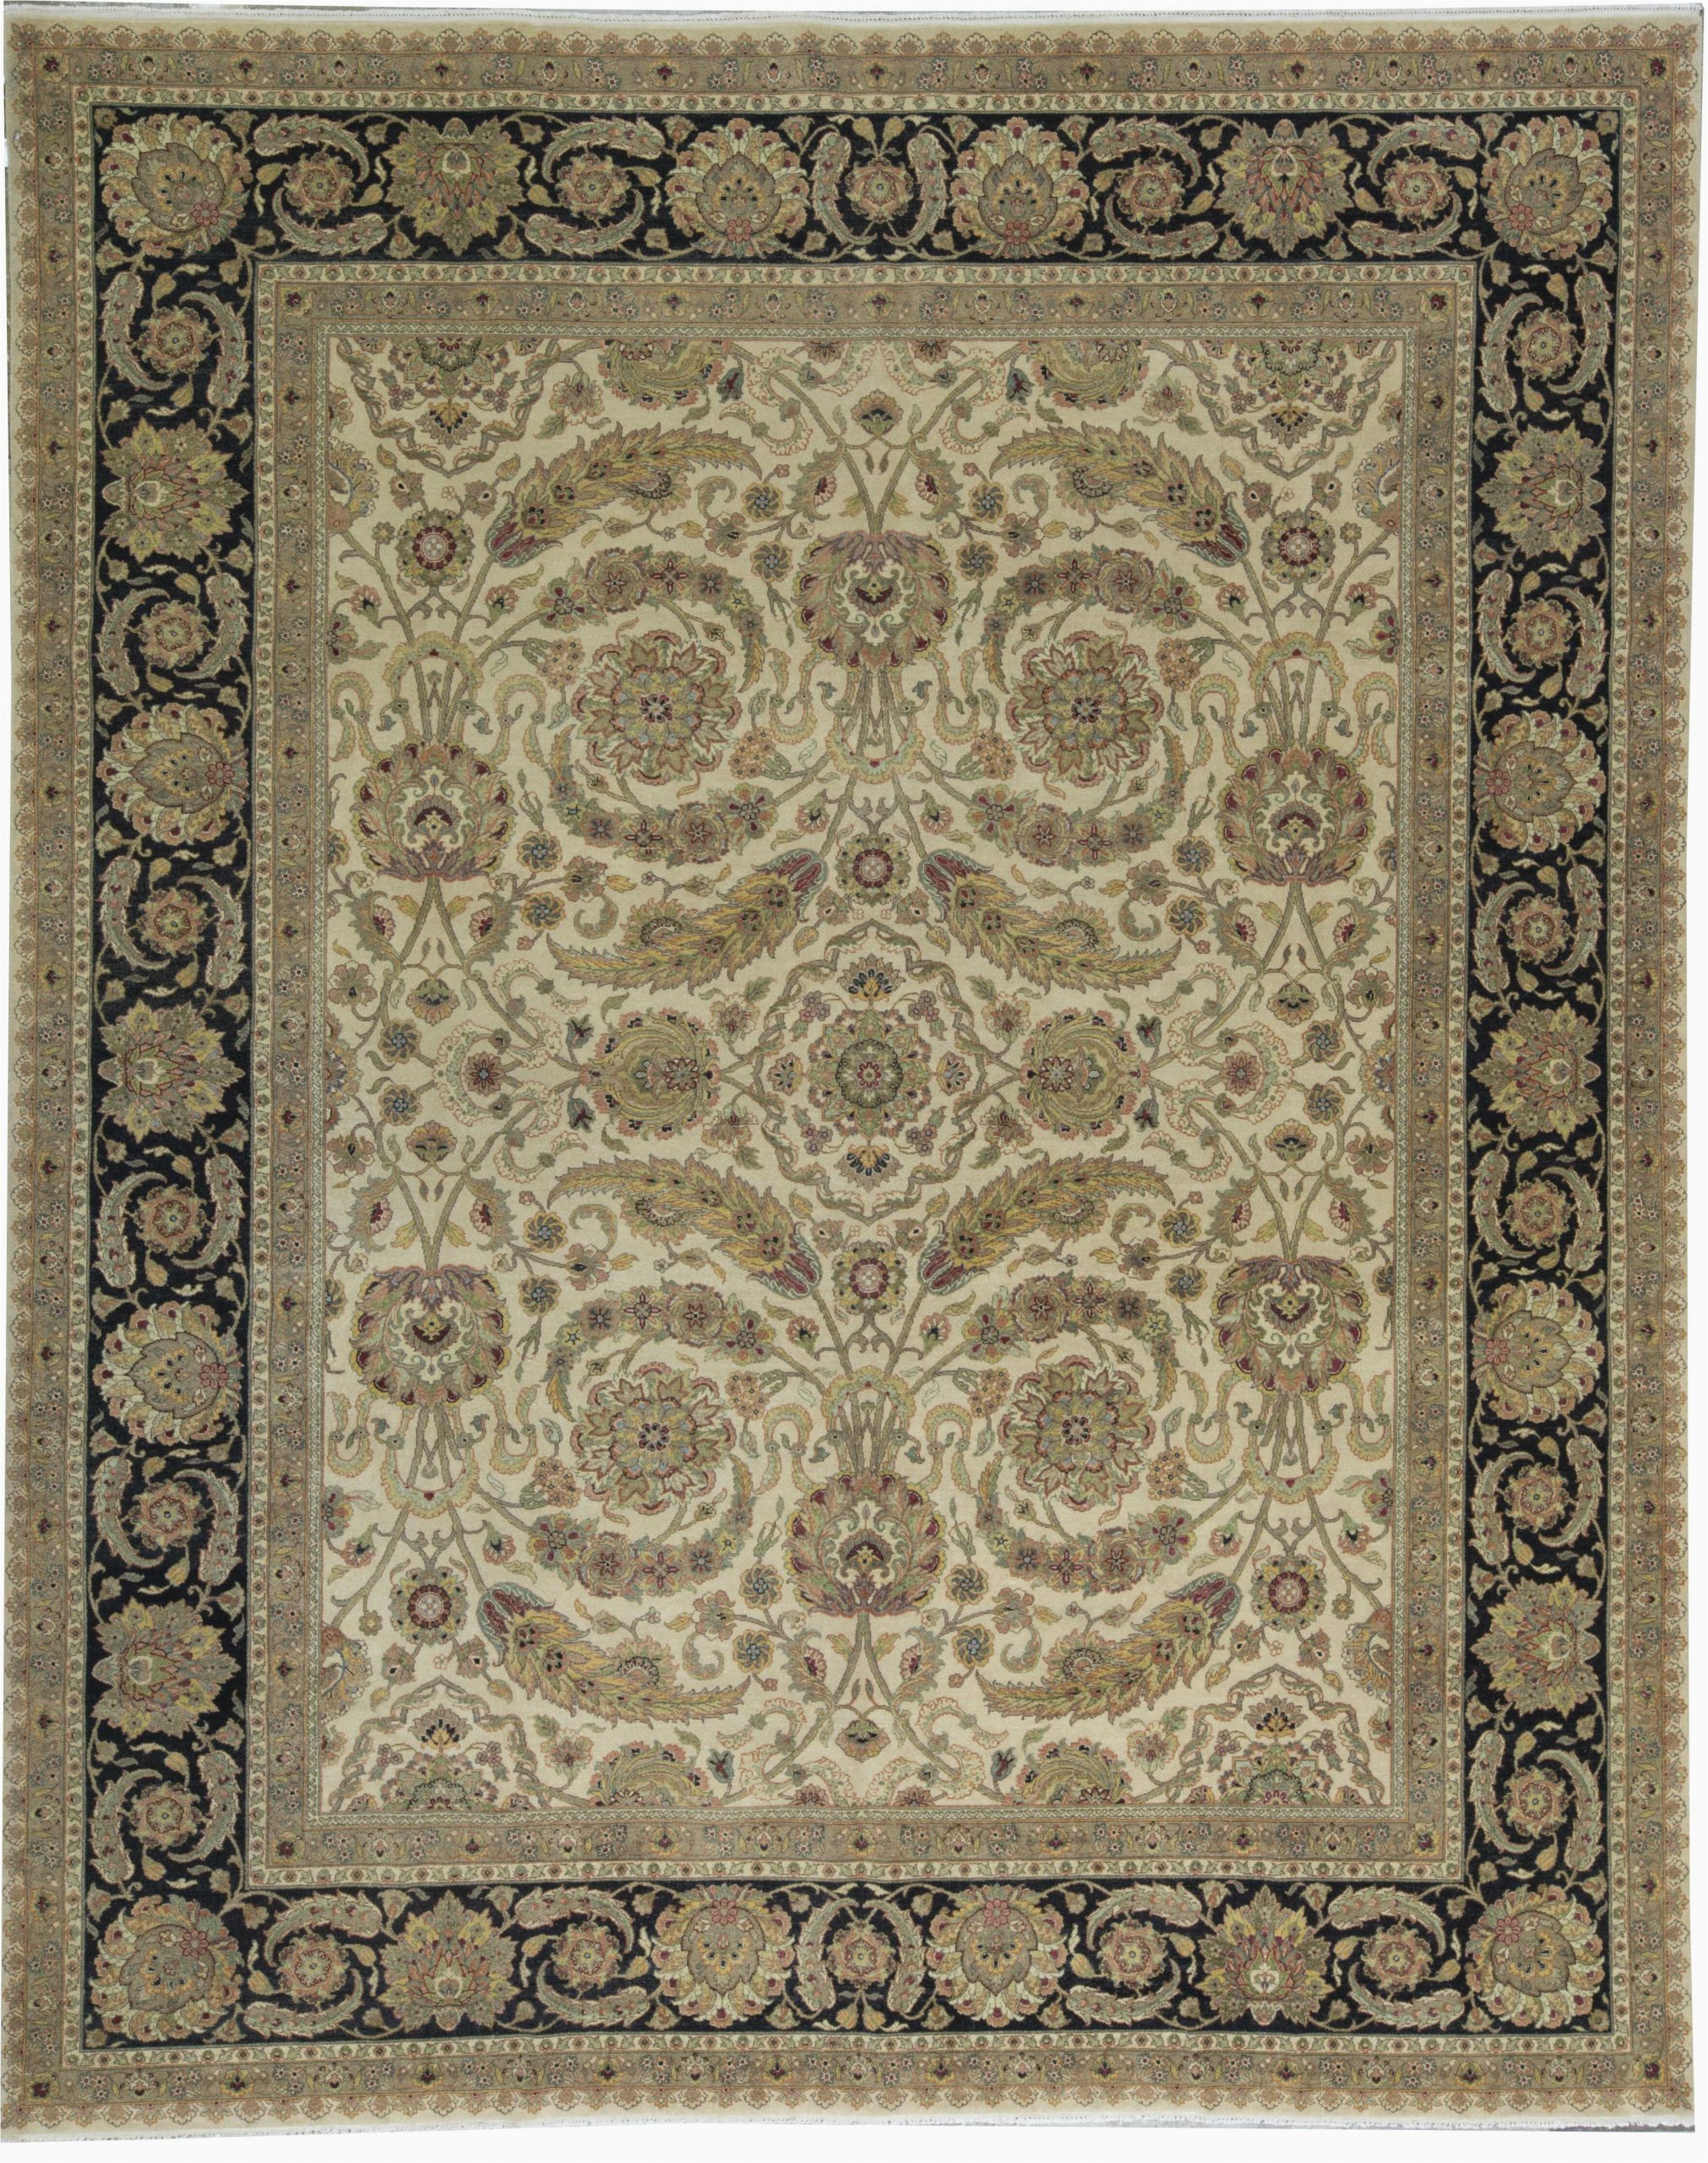 14 X 18 area Rugs E Of A Kind Mountain King Hand Knotted Brown Black 11 10" X 14 7" Wool area Rug